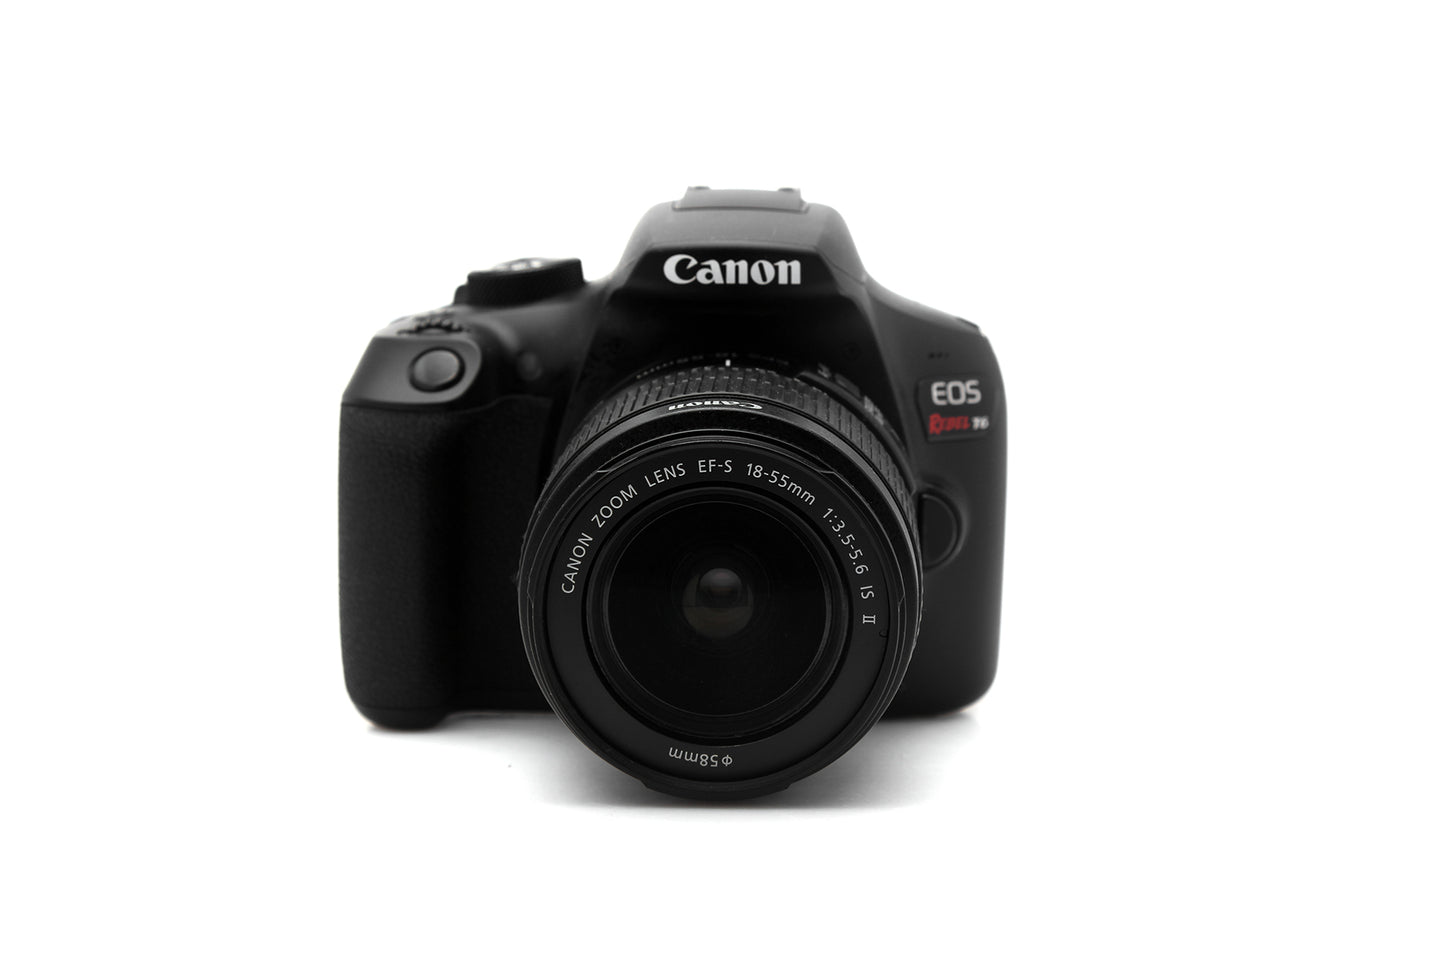 Used Canon 1300D (Rebel T6) Camera With 18-55mm Lens